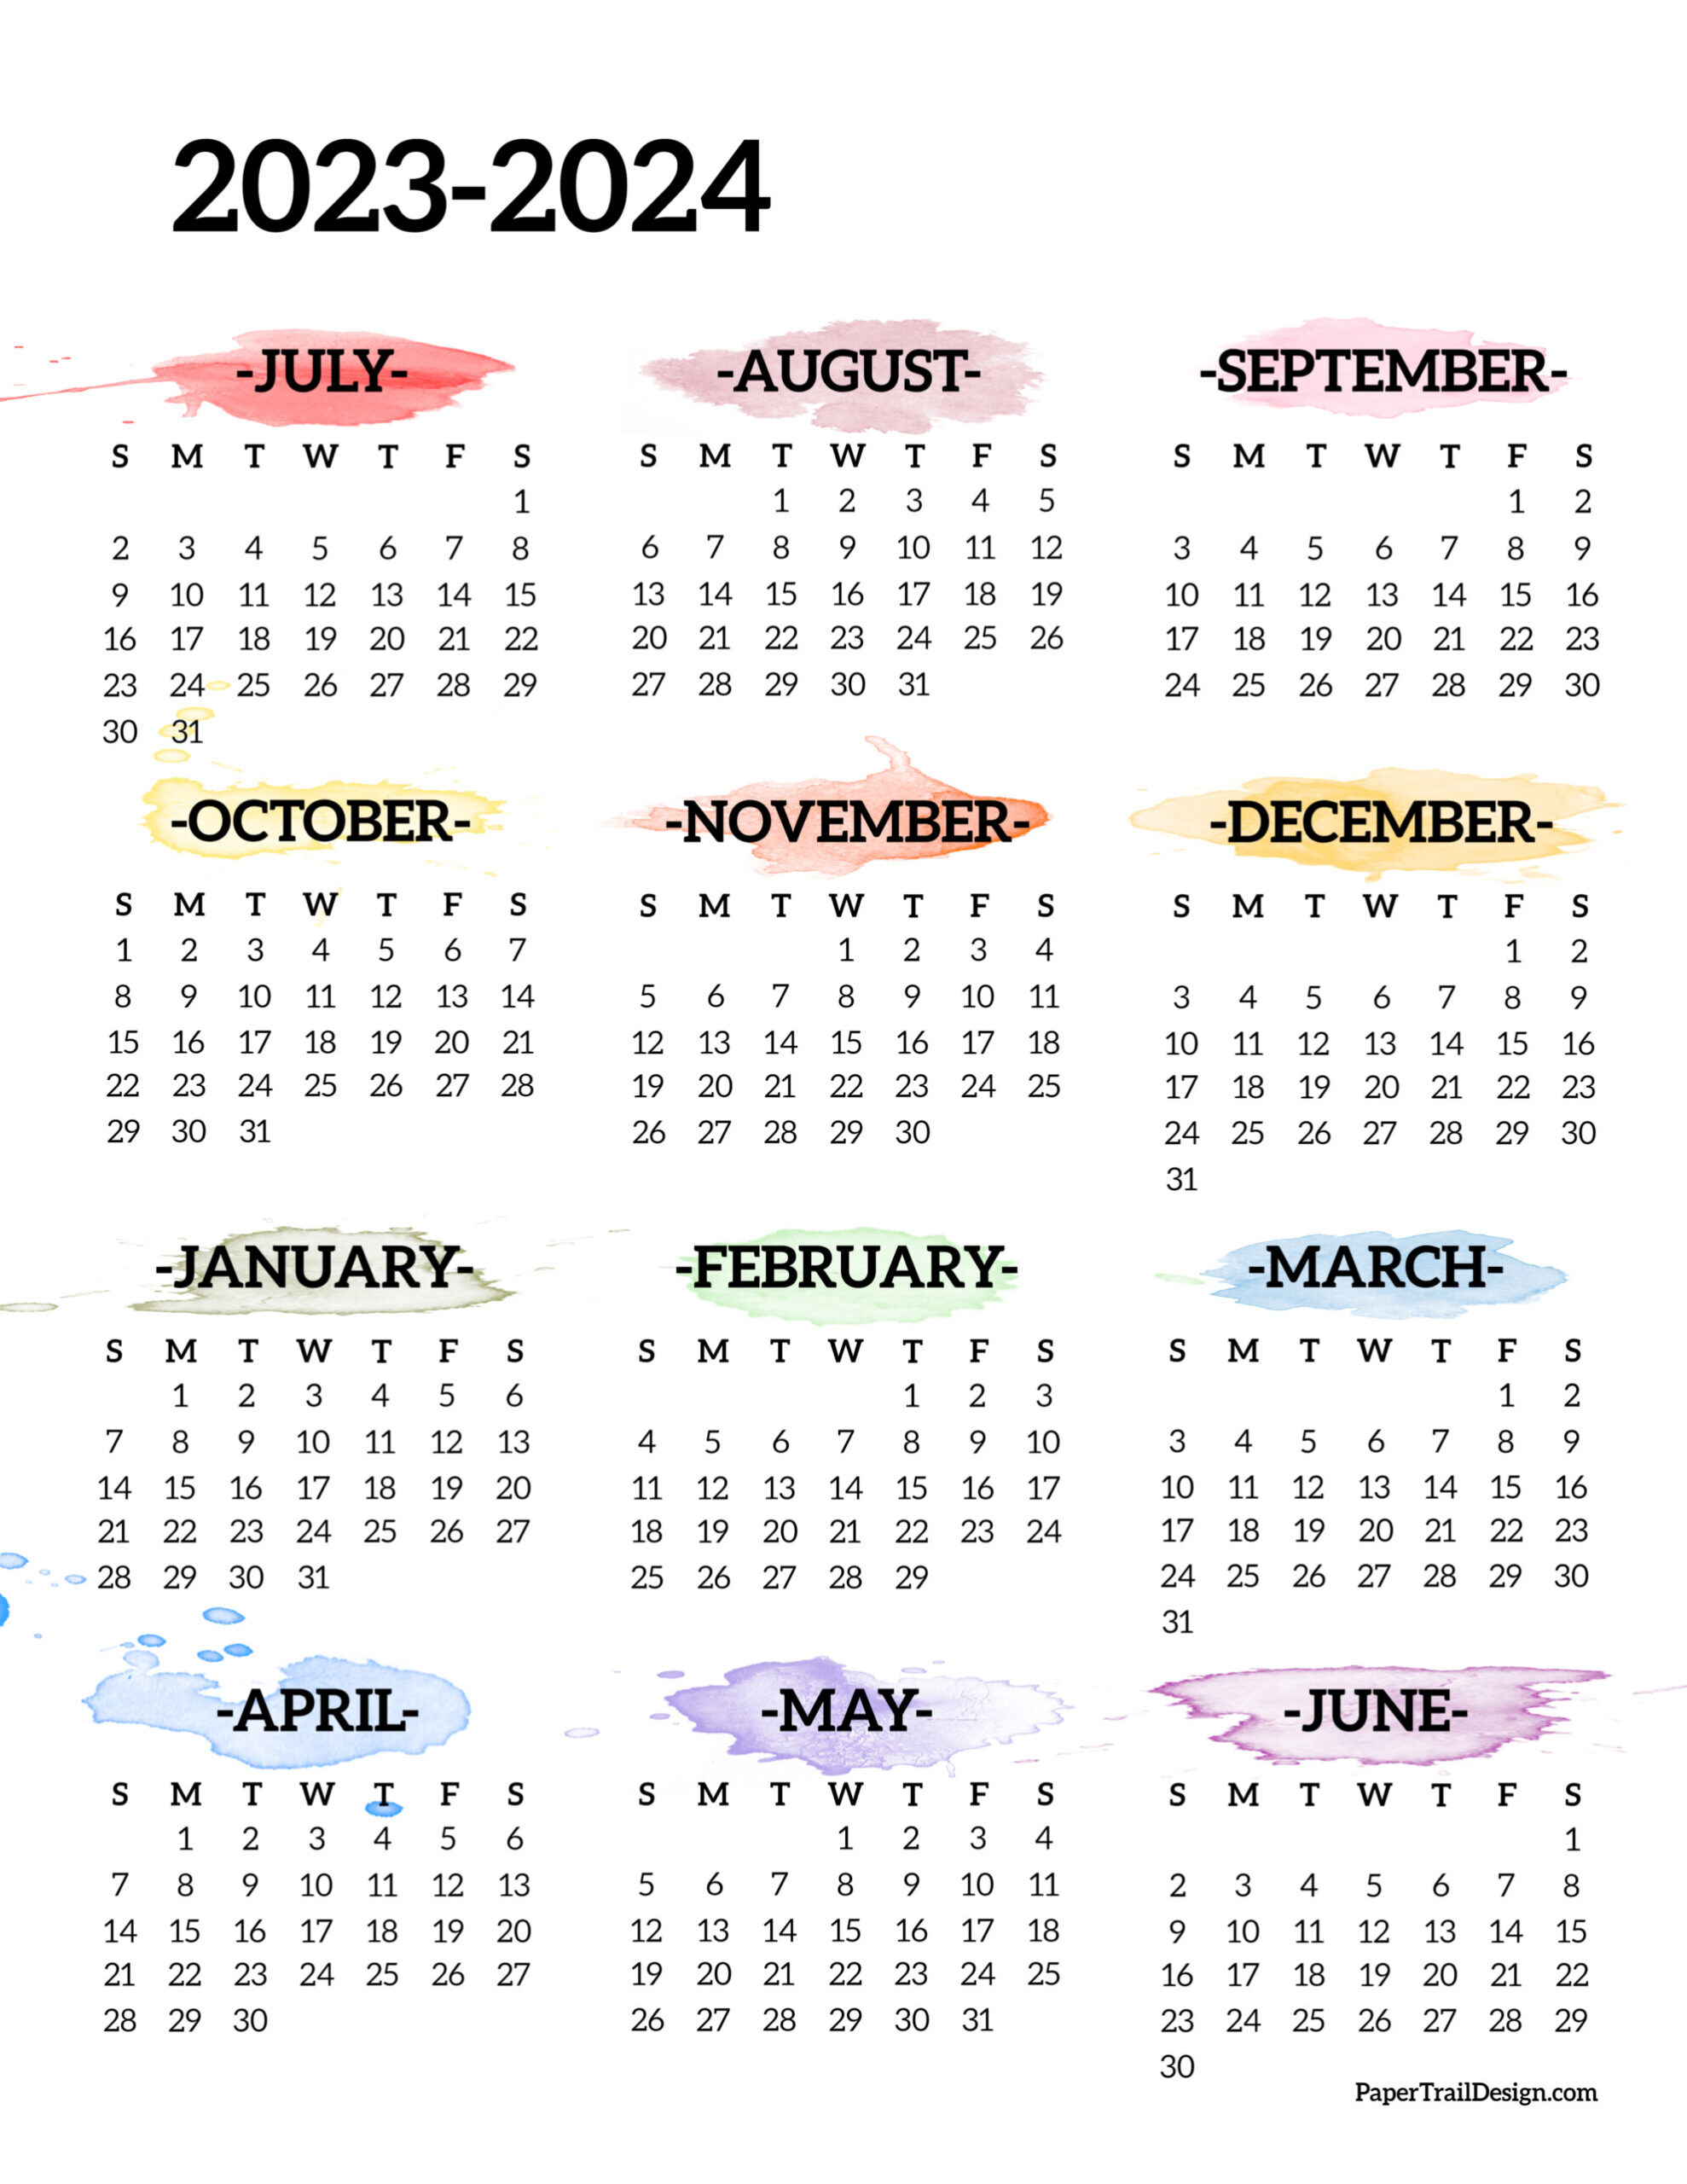 2023-2024 School Year Calendar Free Printable - Paper Trail Design for Printable Calendar August 2023 To July 2024